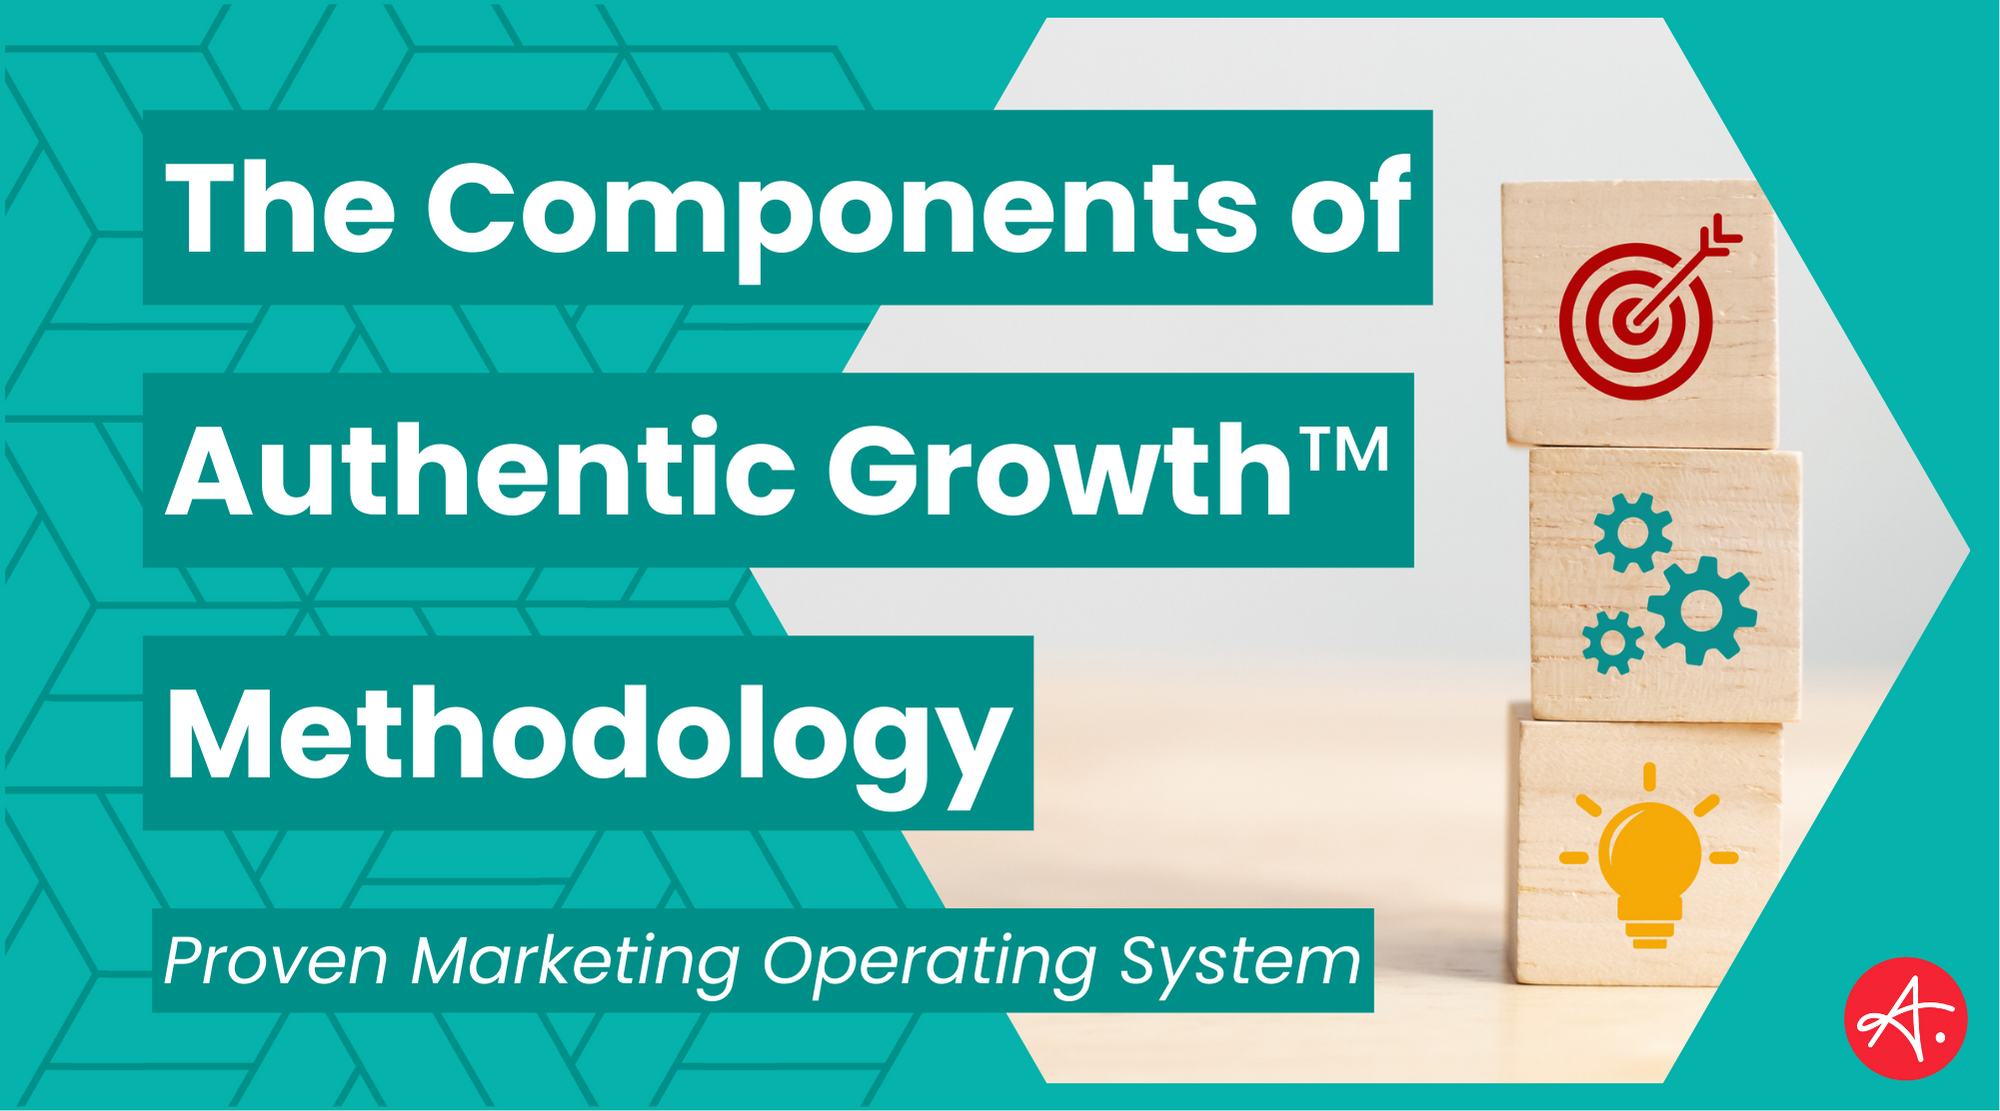 The Components of Authentic Growth™ Methodology